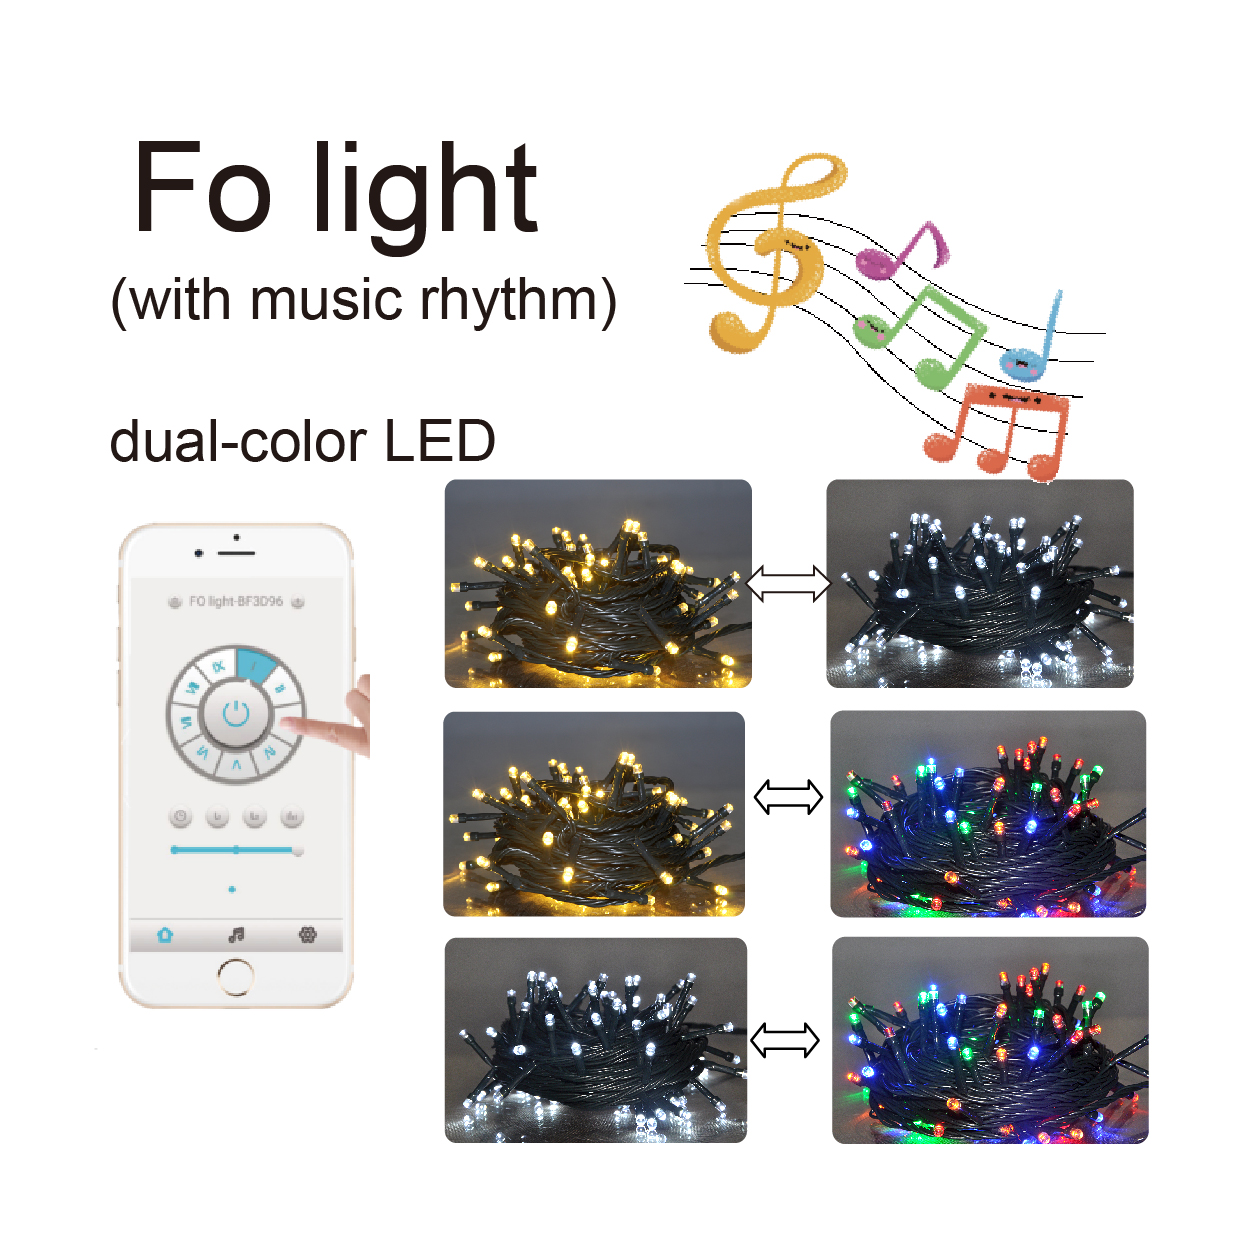 200L dual color LED fairy light with APP (APP name: FO light), with music ryhthm